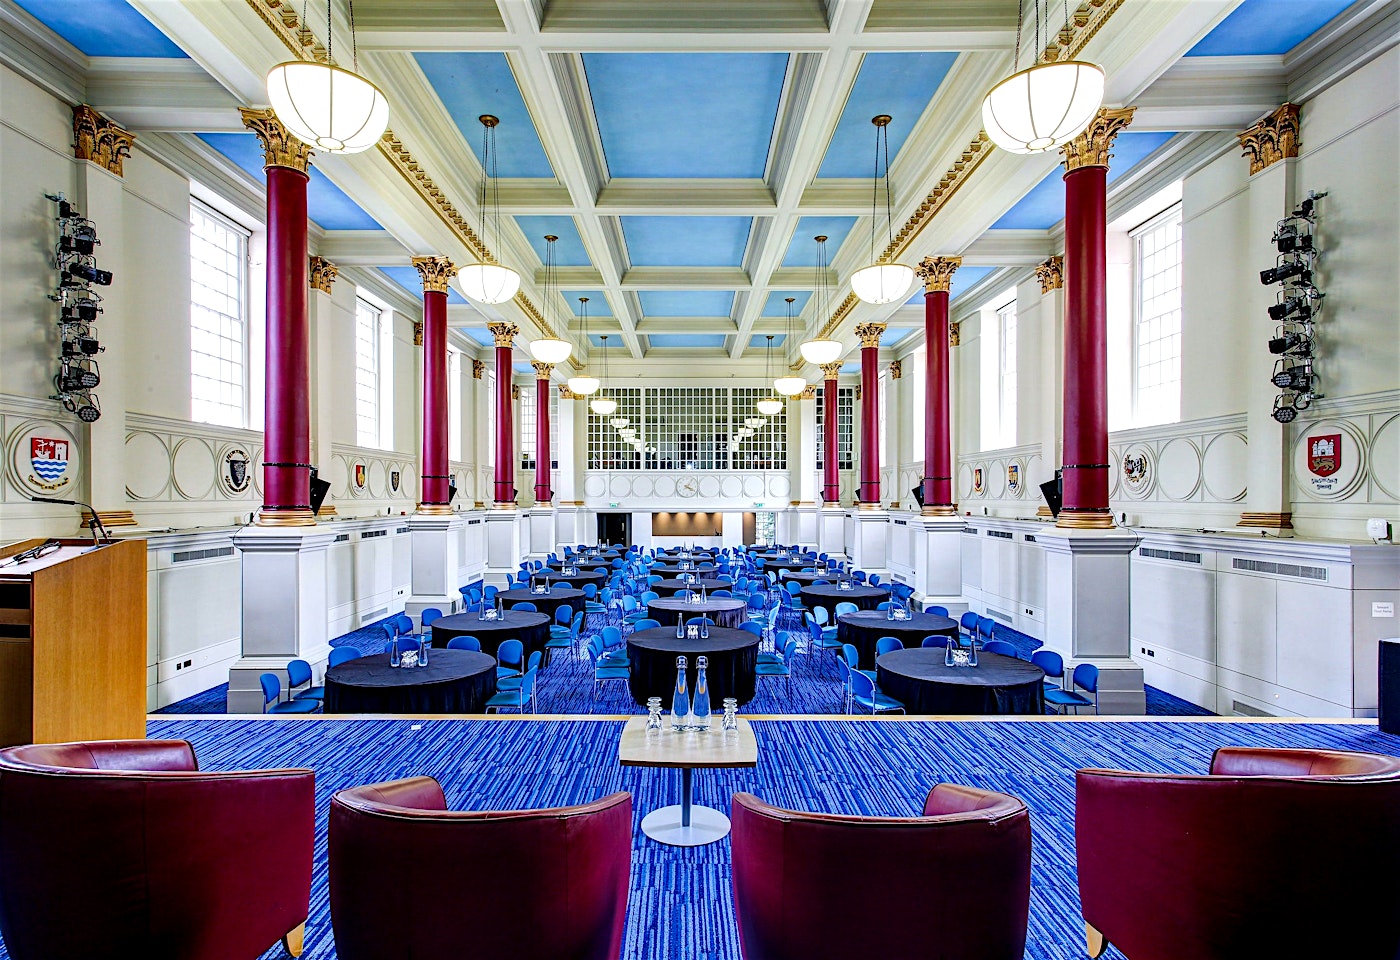 BMA house london large conference centres